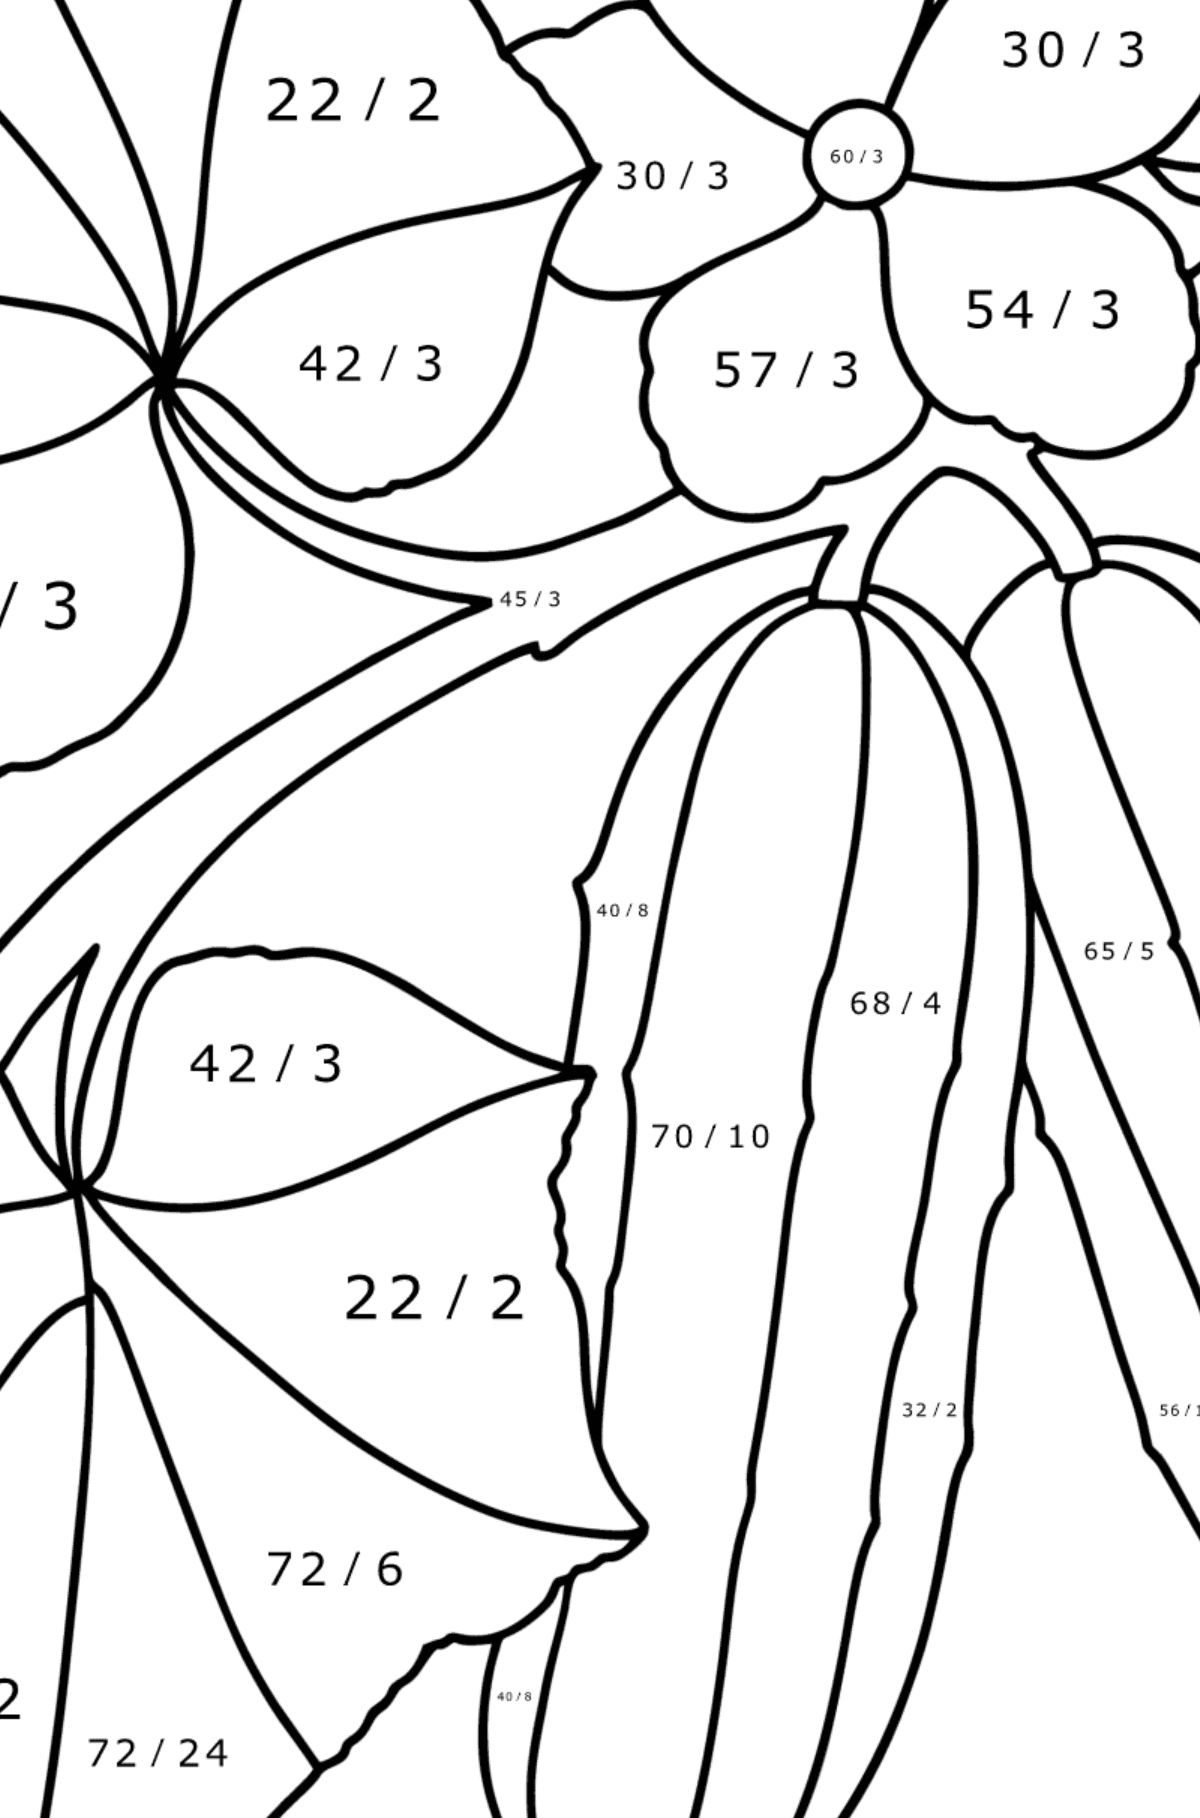 Cucumber grows сoloring page - Math Coloring - Division for Kids